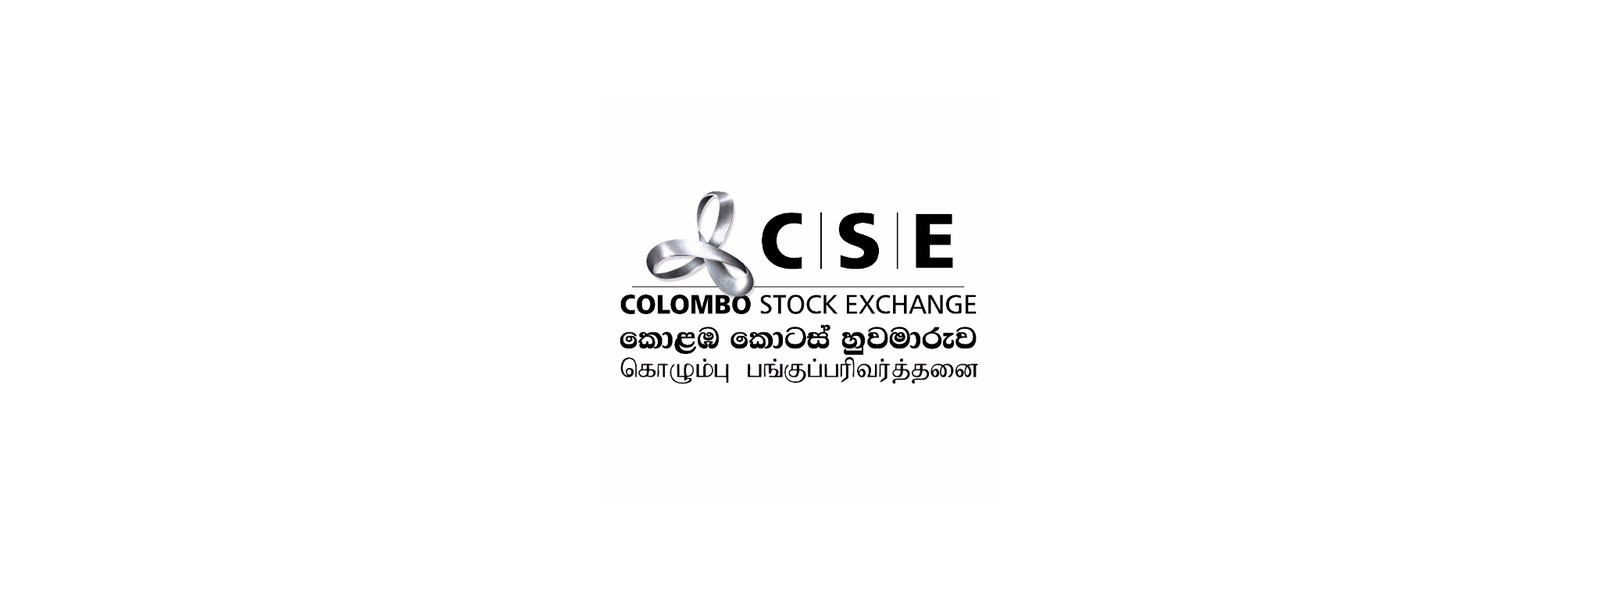 CSE records another all-time high